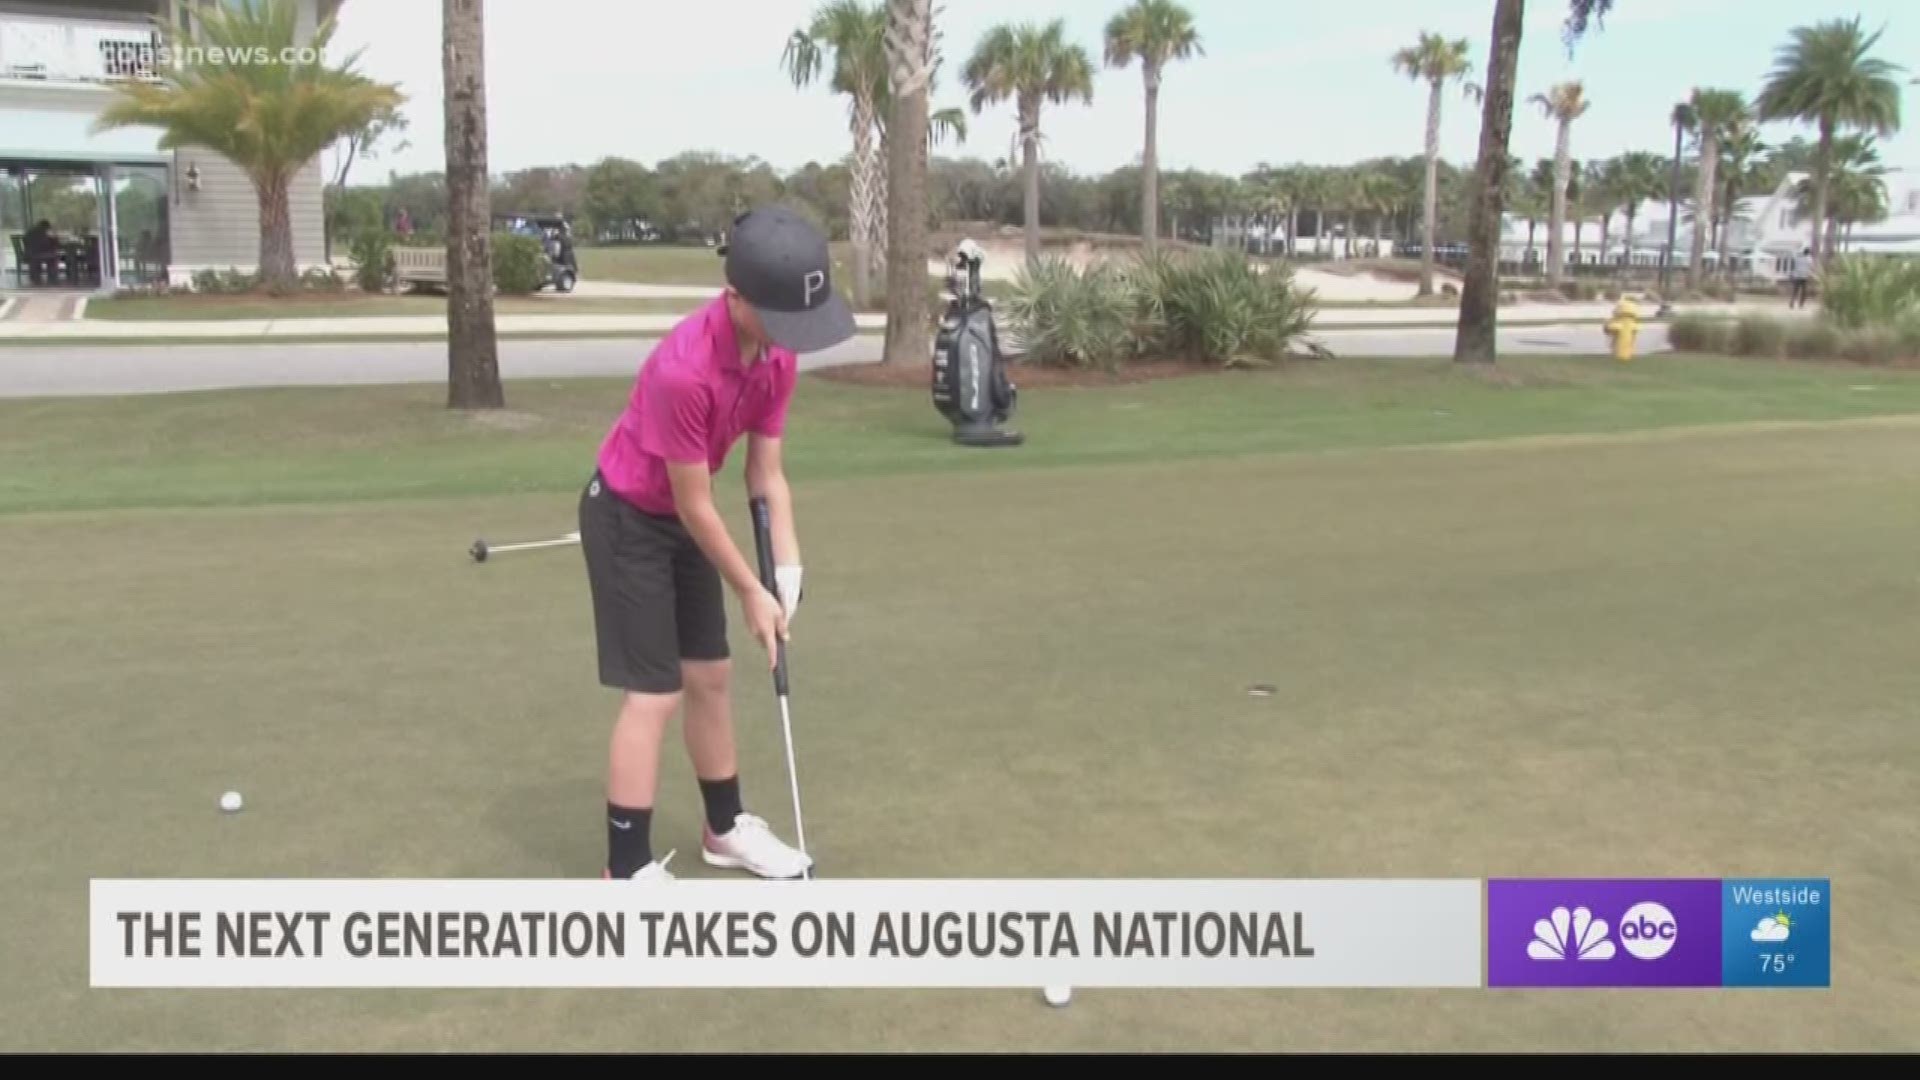 Two First Coast natives are among the 80 young golfers who have qualified for the Drive, Chip & Putt National Finals at Augusta National the weekend leading up to The Masters.